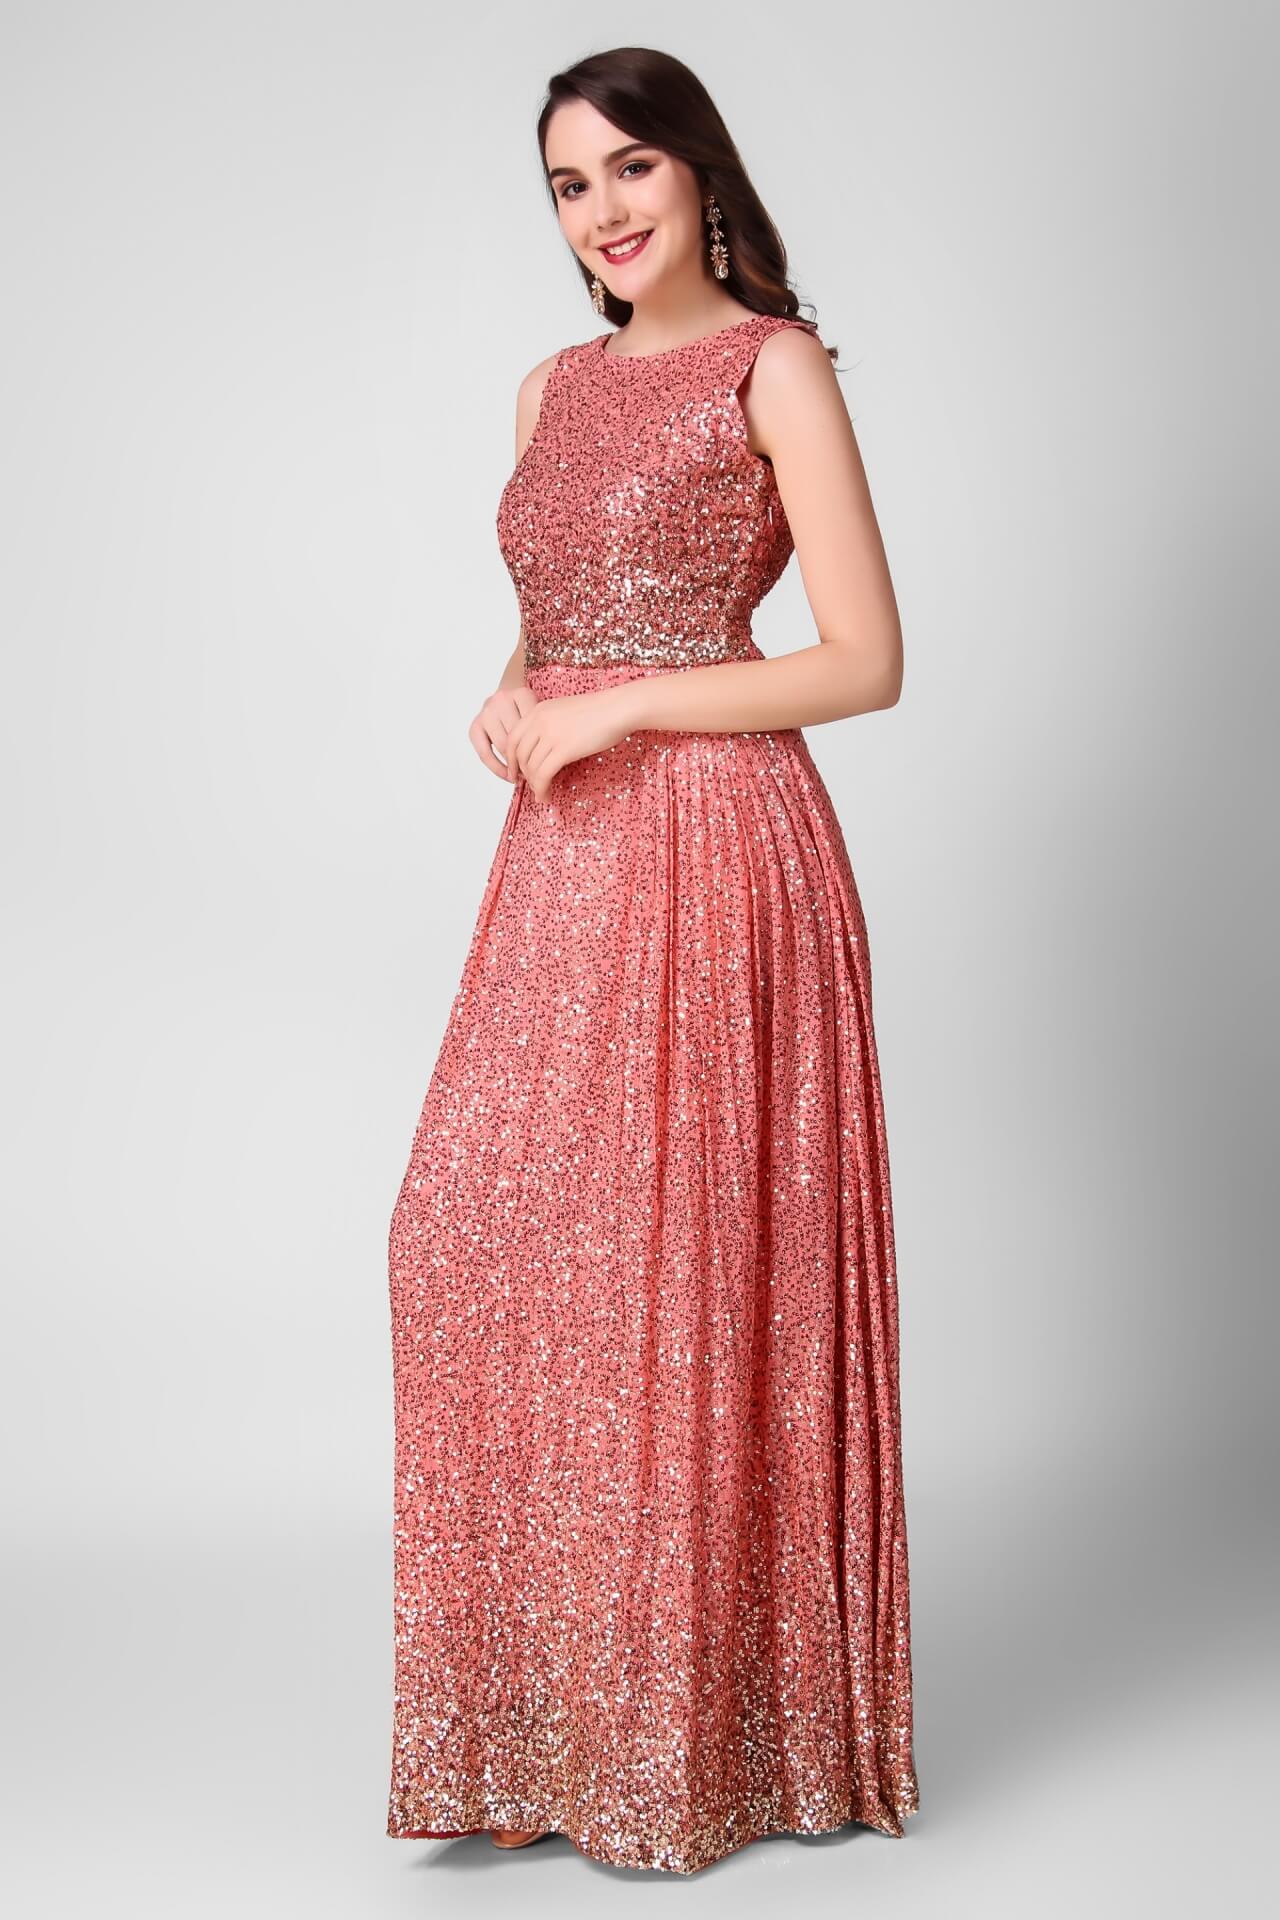 Peach Sequins Stylish Gown | Ghera By Neera & Arushi